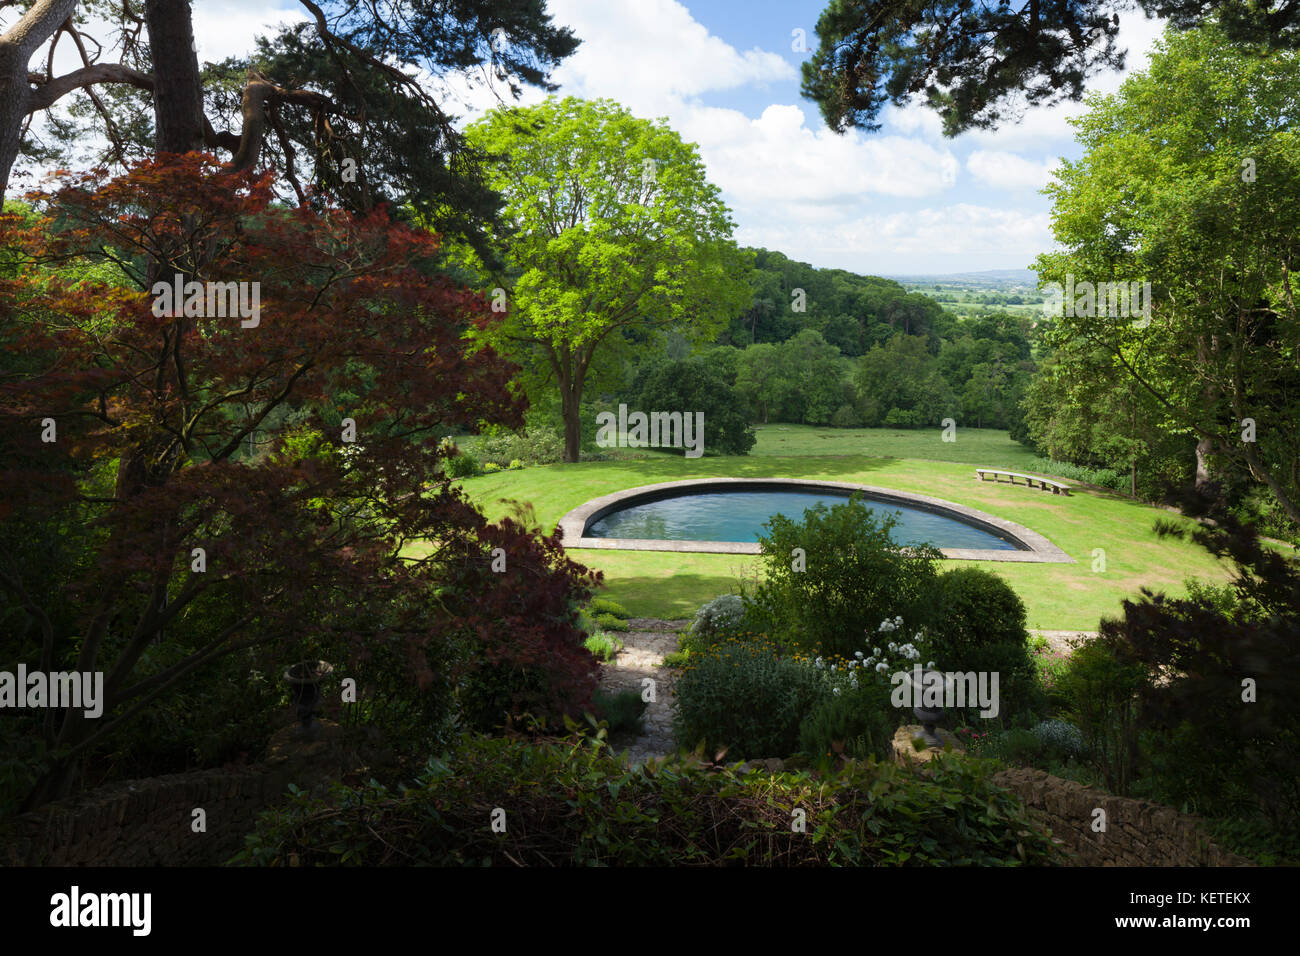 A view of the semi-circular pool in the lower garden seen from the Middle Banks garden of Kiftsgate Court, Cotswolds, Gloucestershire, England. Stock Photo